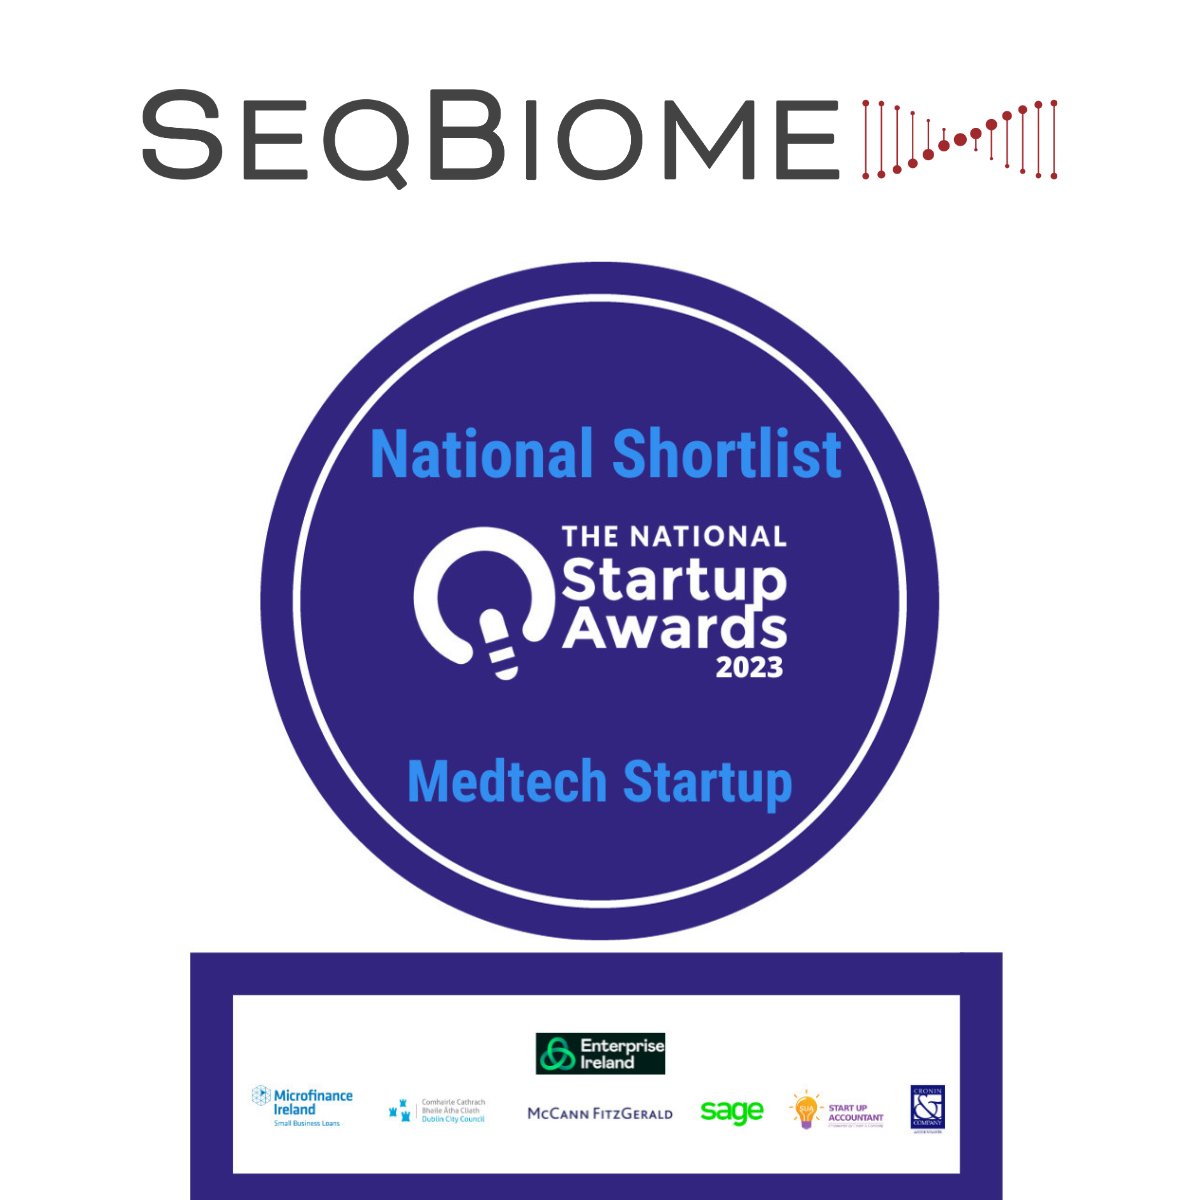 We are delighted to be shortlisted for the MedTech Start-up Award at the #nationalstartupawards2023. This is a testament to our great team who have already achieved incredible success in such a short time. #microbiomeresearch #microbiota #guthealth